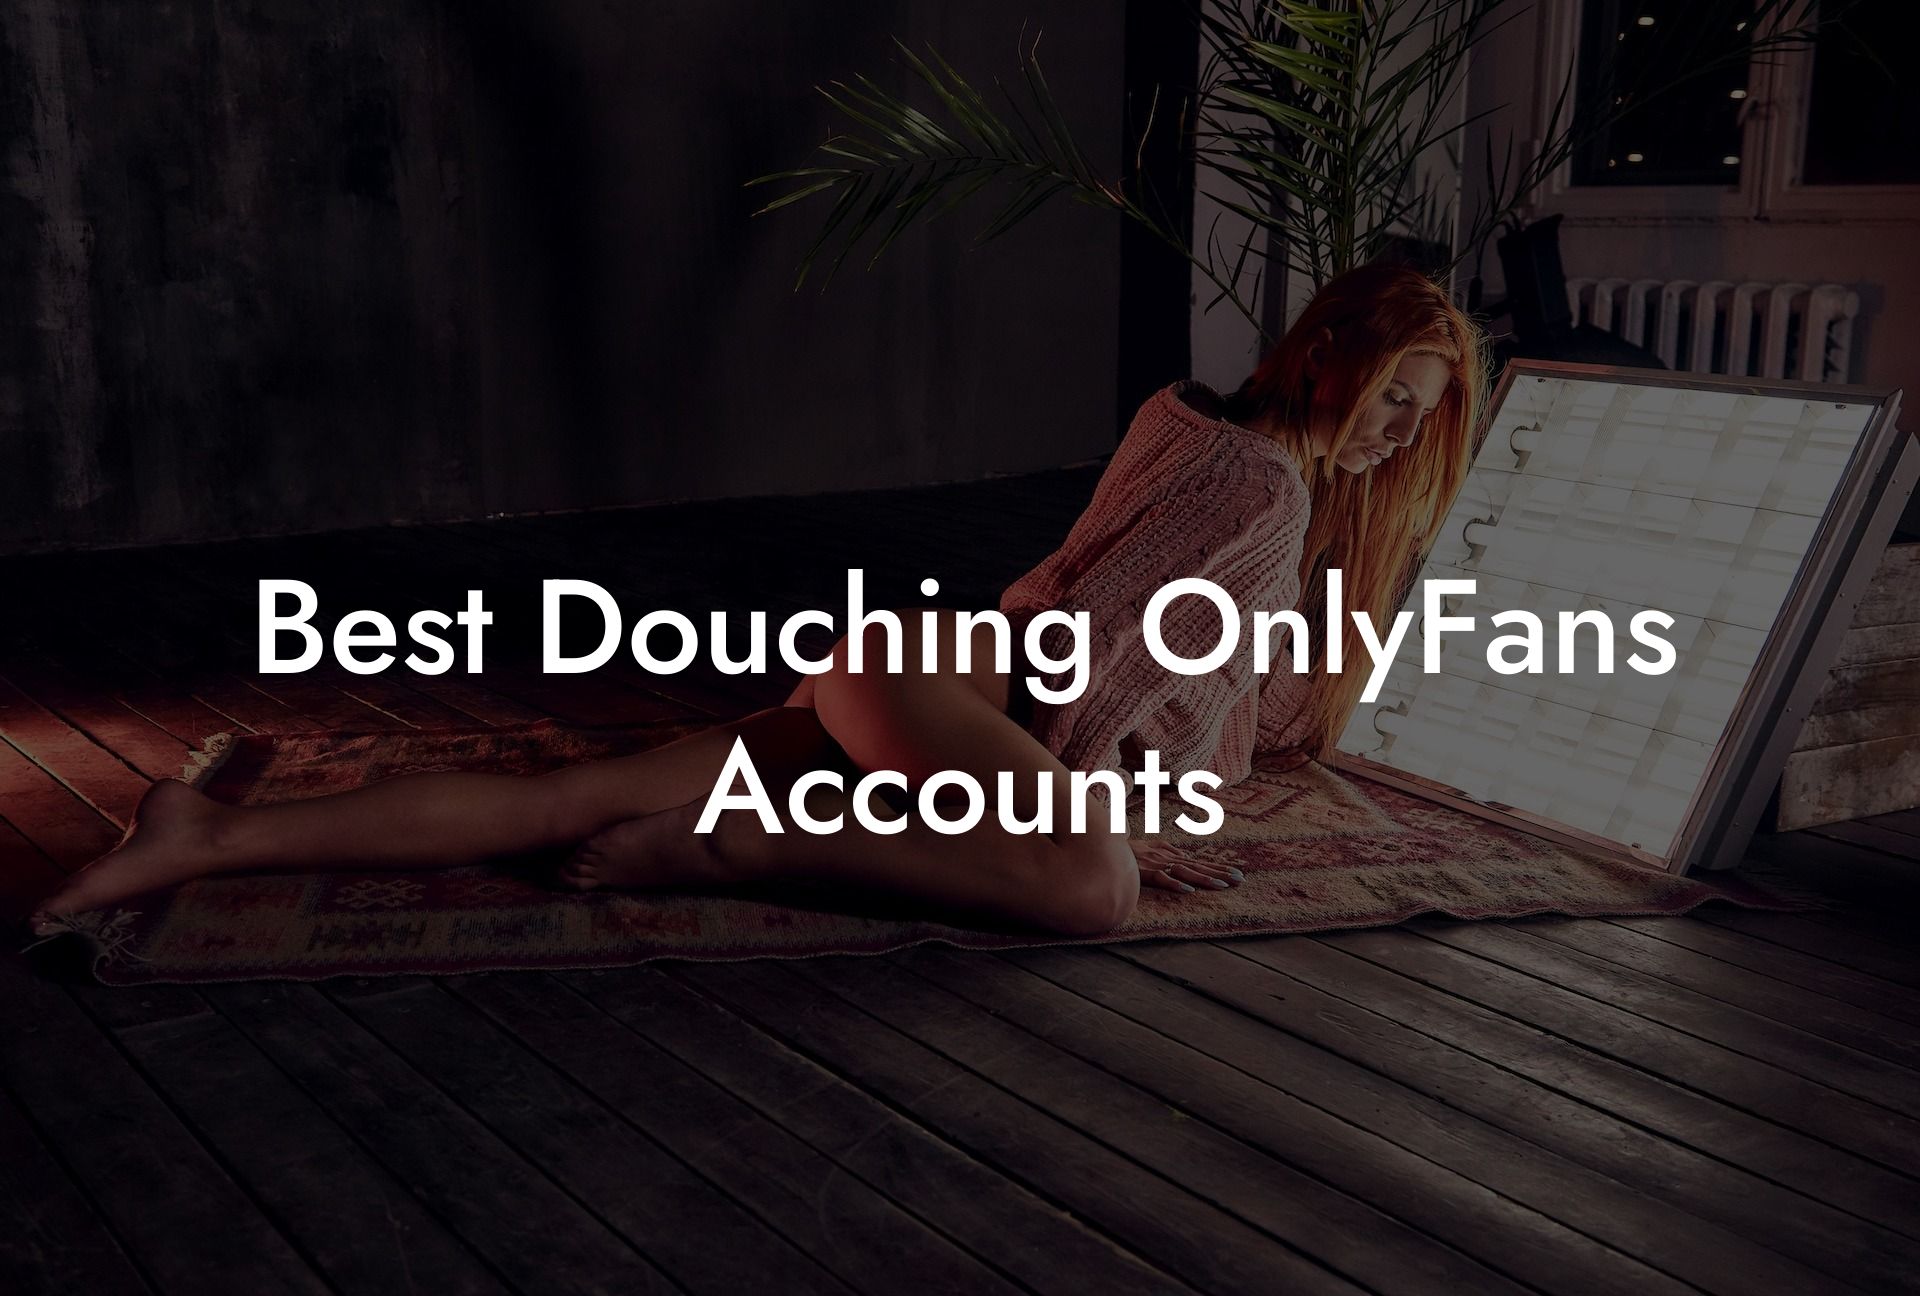 Best Douching OnlyFans Accounts